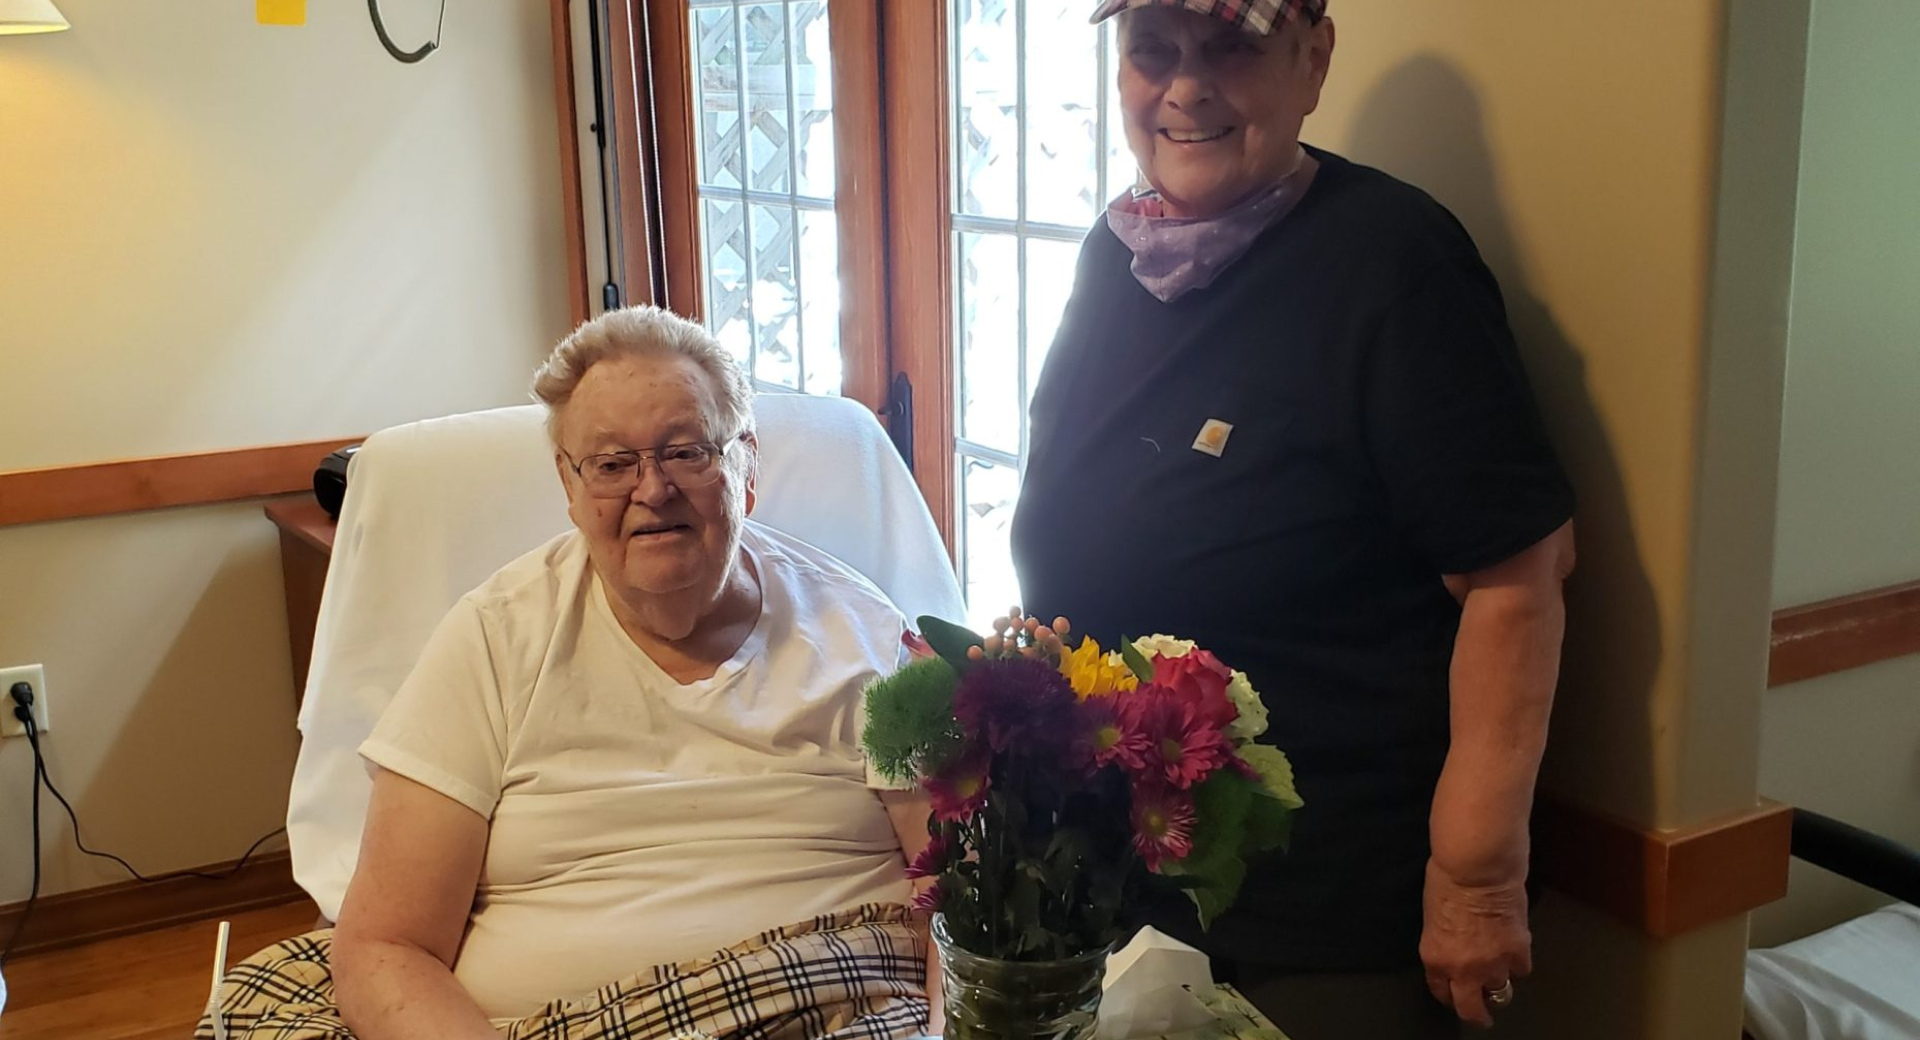 Kressins Celebrate 60 years at Rainbow Hospice Care Inpatient Center